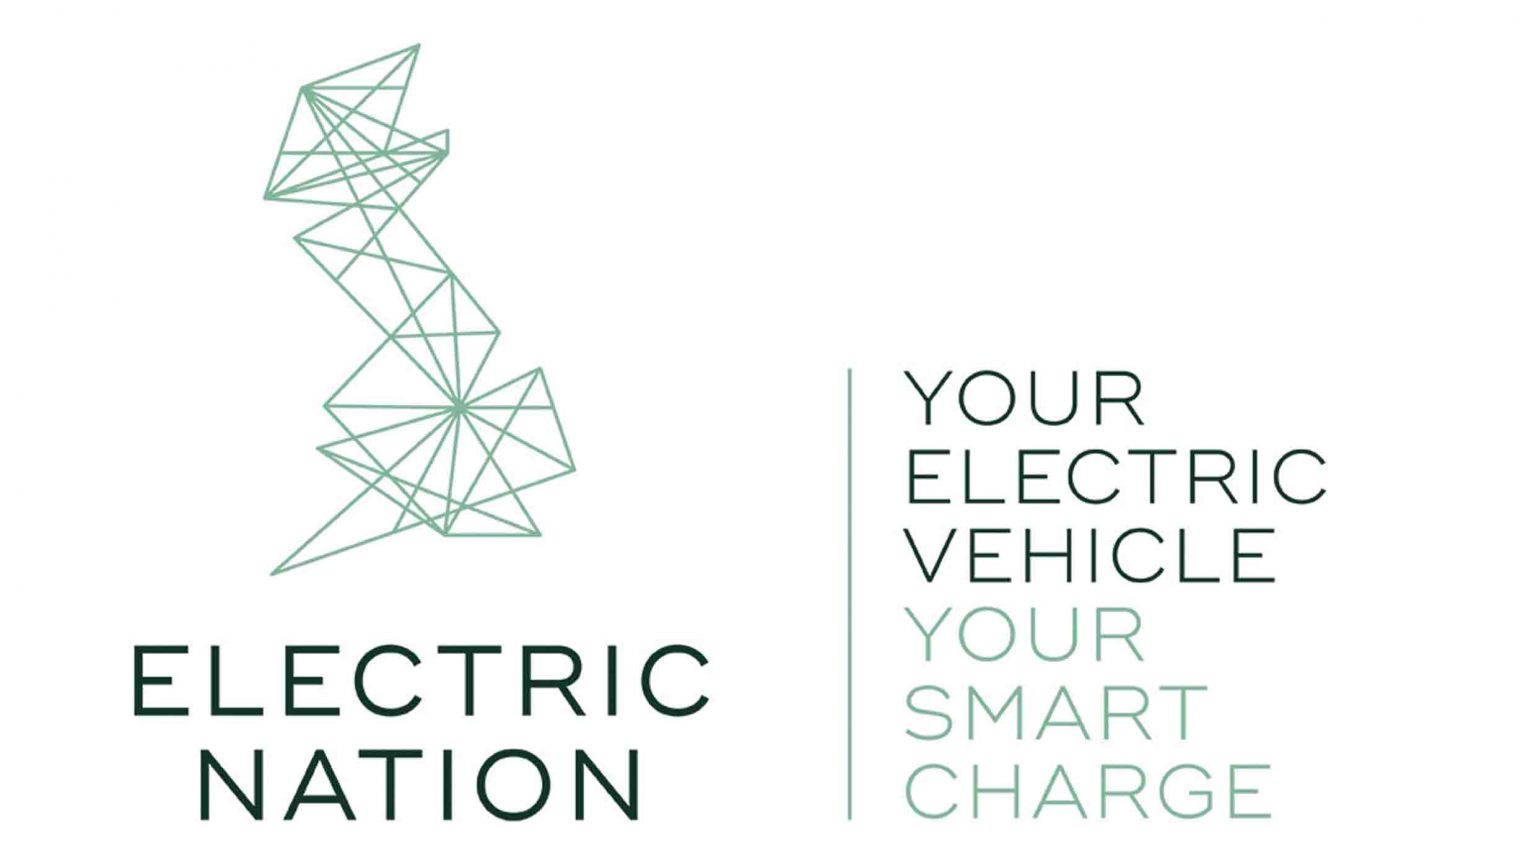 Electric Nation - Your Electric Vehicle, your smart charge